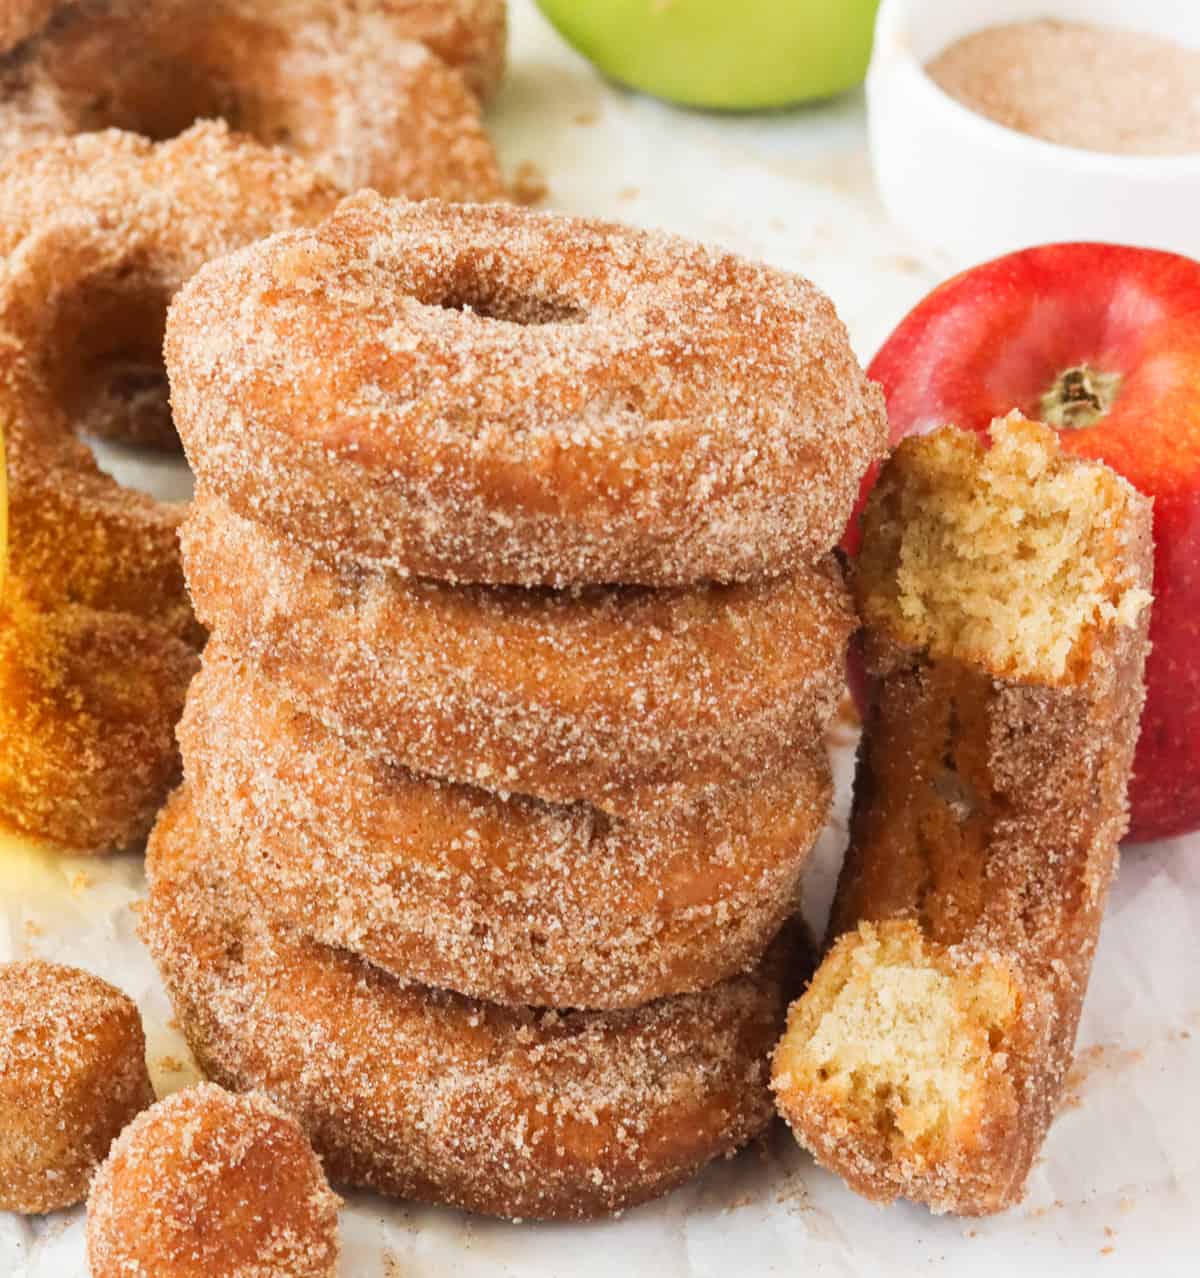 Enjoy with Apple Cider Donuts 